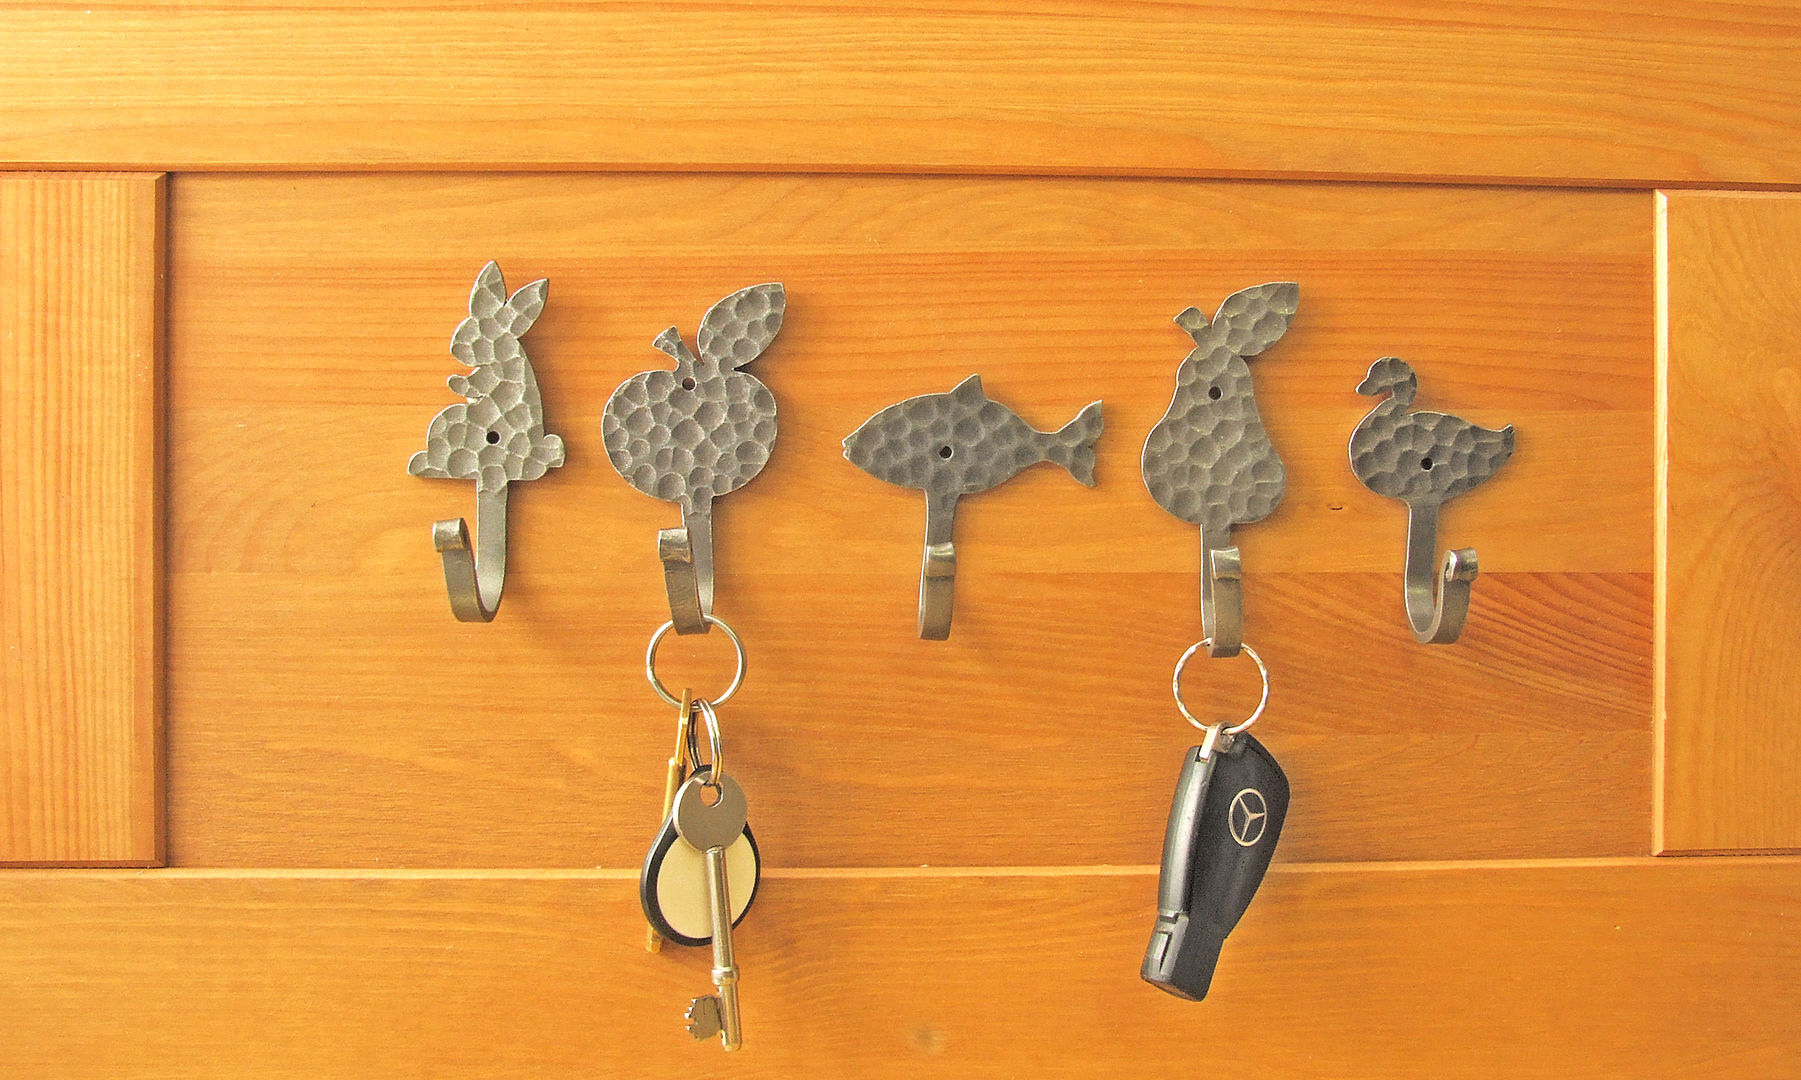 Hooks for keys or cups or for what ever you want... Clayton Munroe أبواب حديد اكسسوارات الابواب